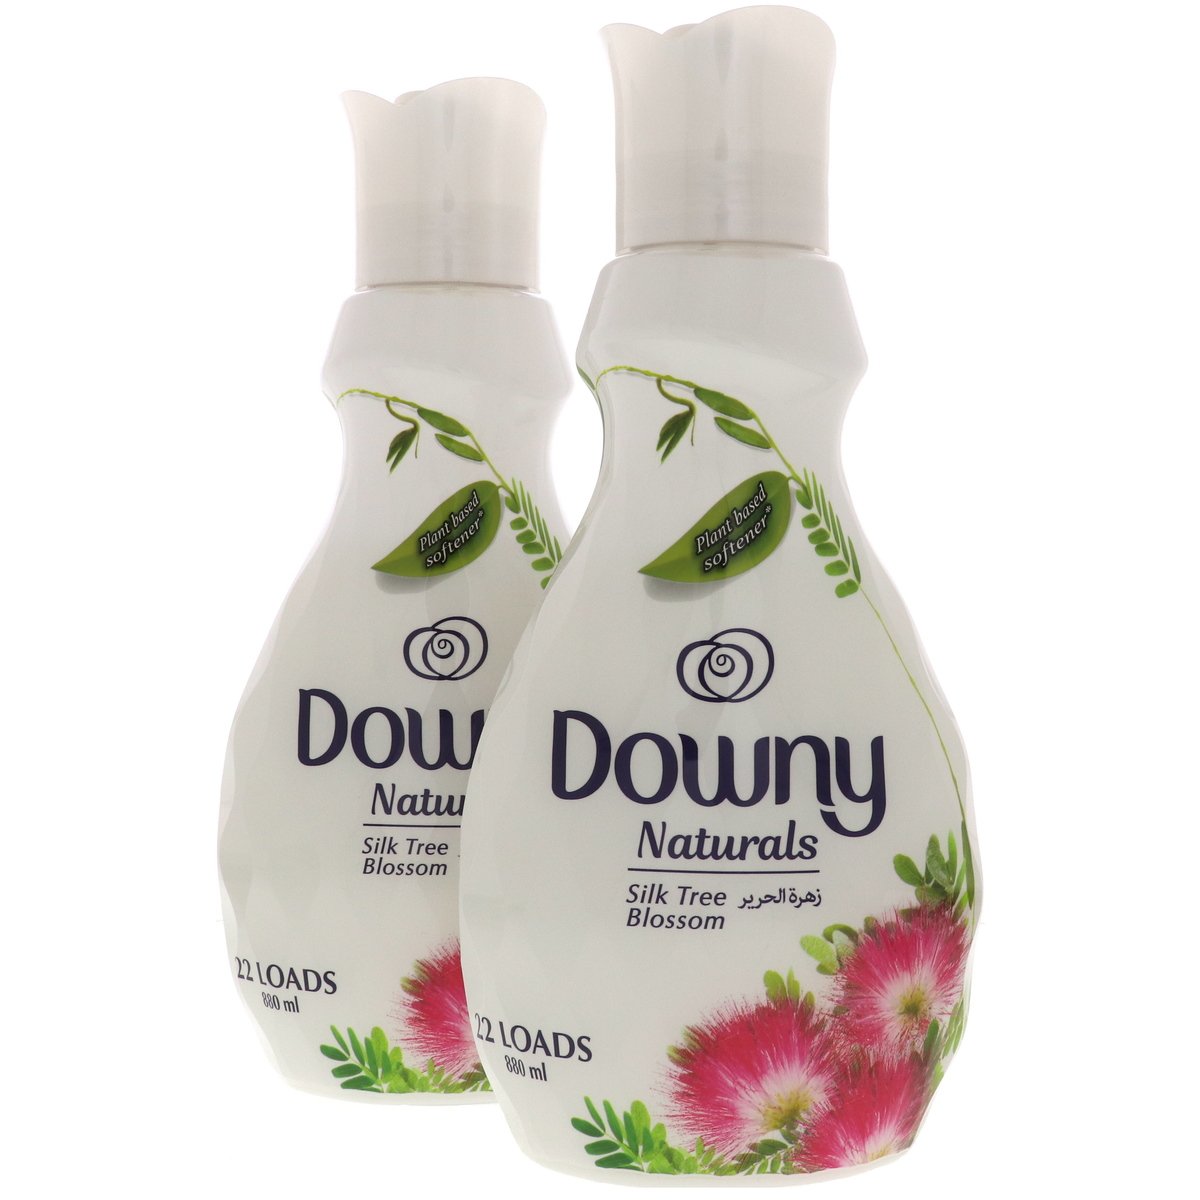 Downy Naturals Concentrate Fabric Softener Silky Tree Blossom Scent 2 x 880ml